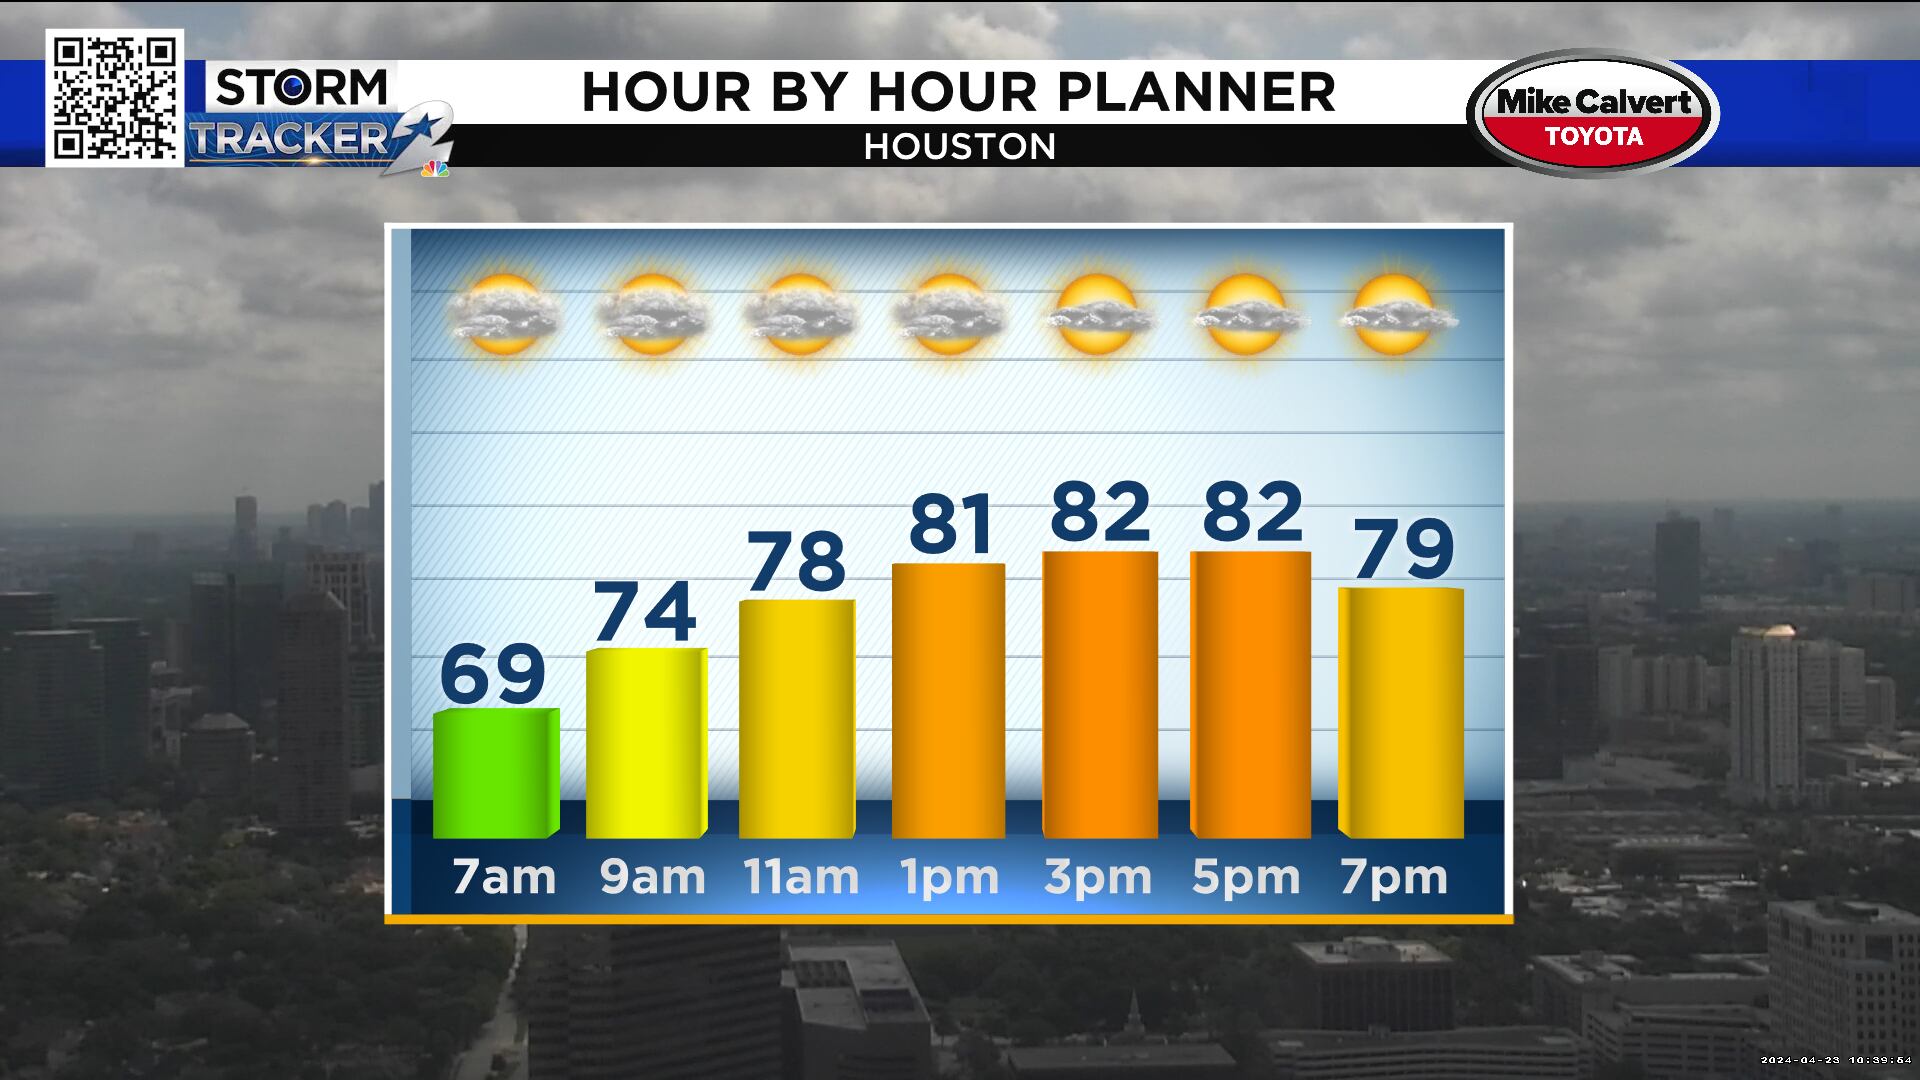 Temperatures will warm up to the lower-80s.